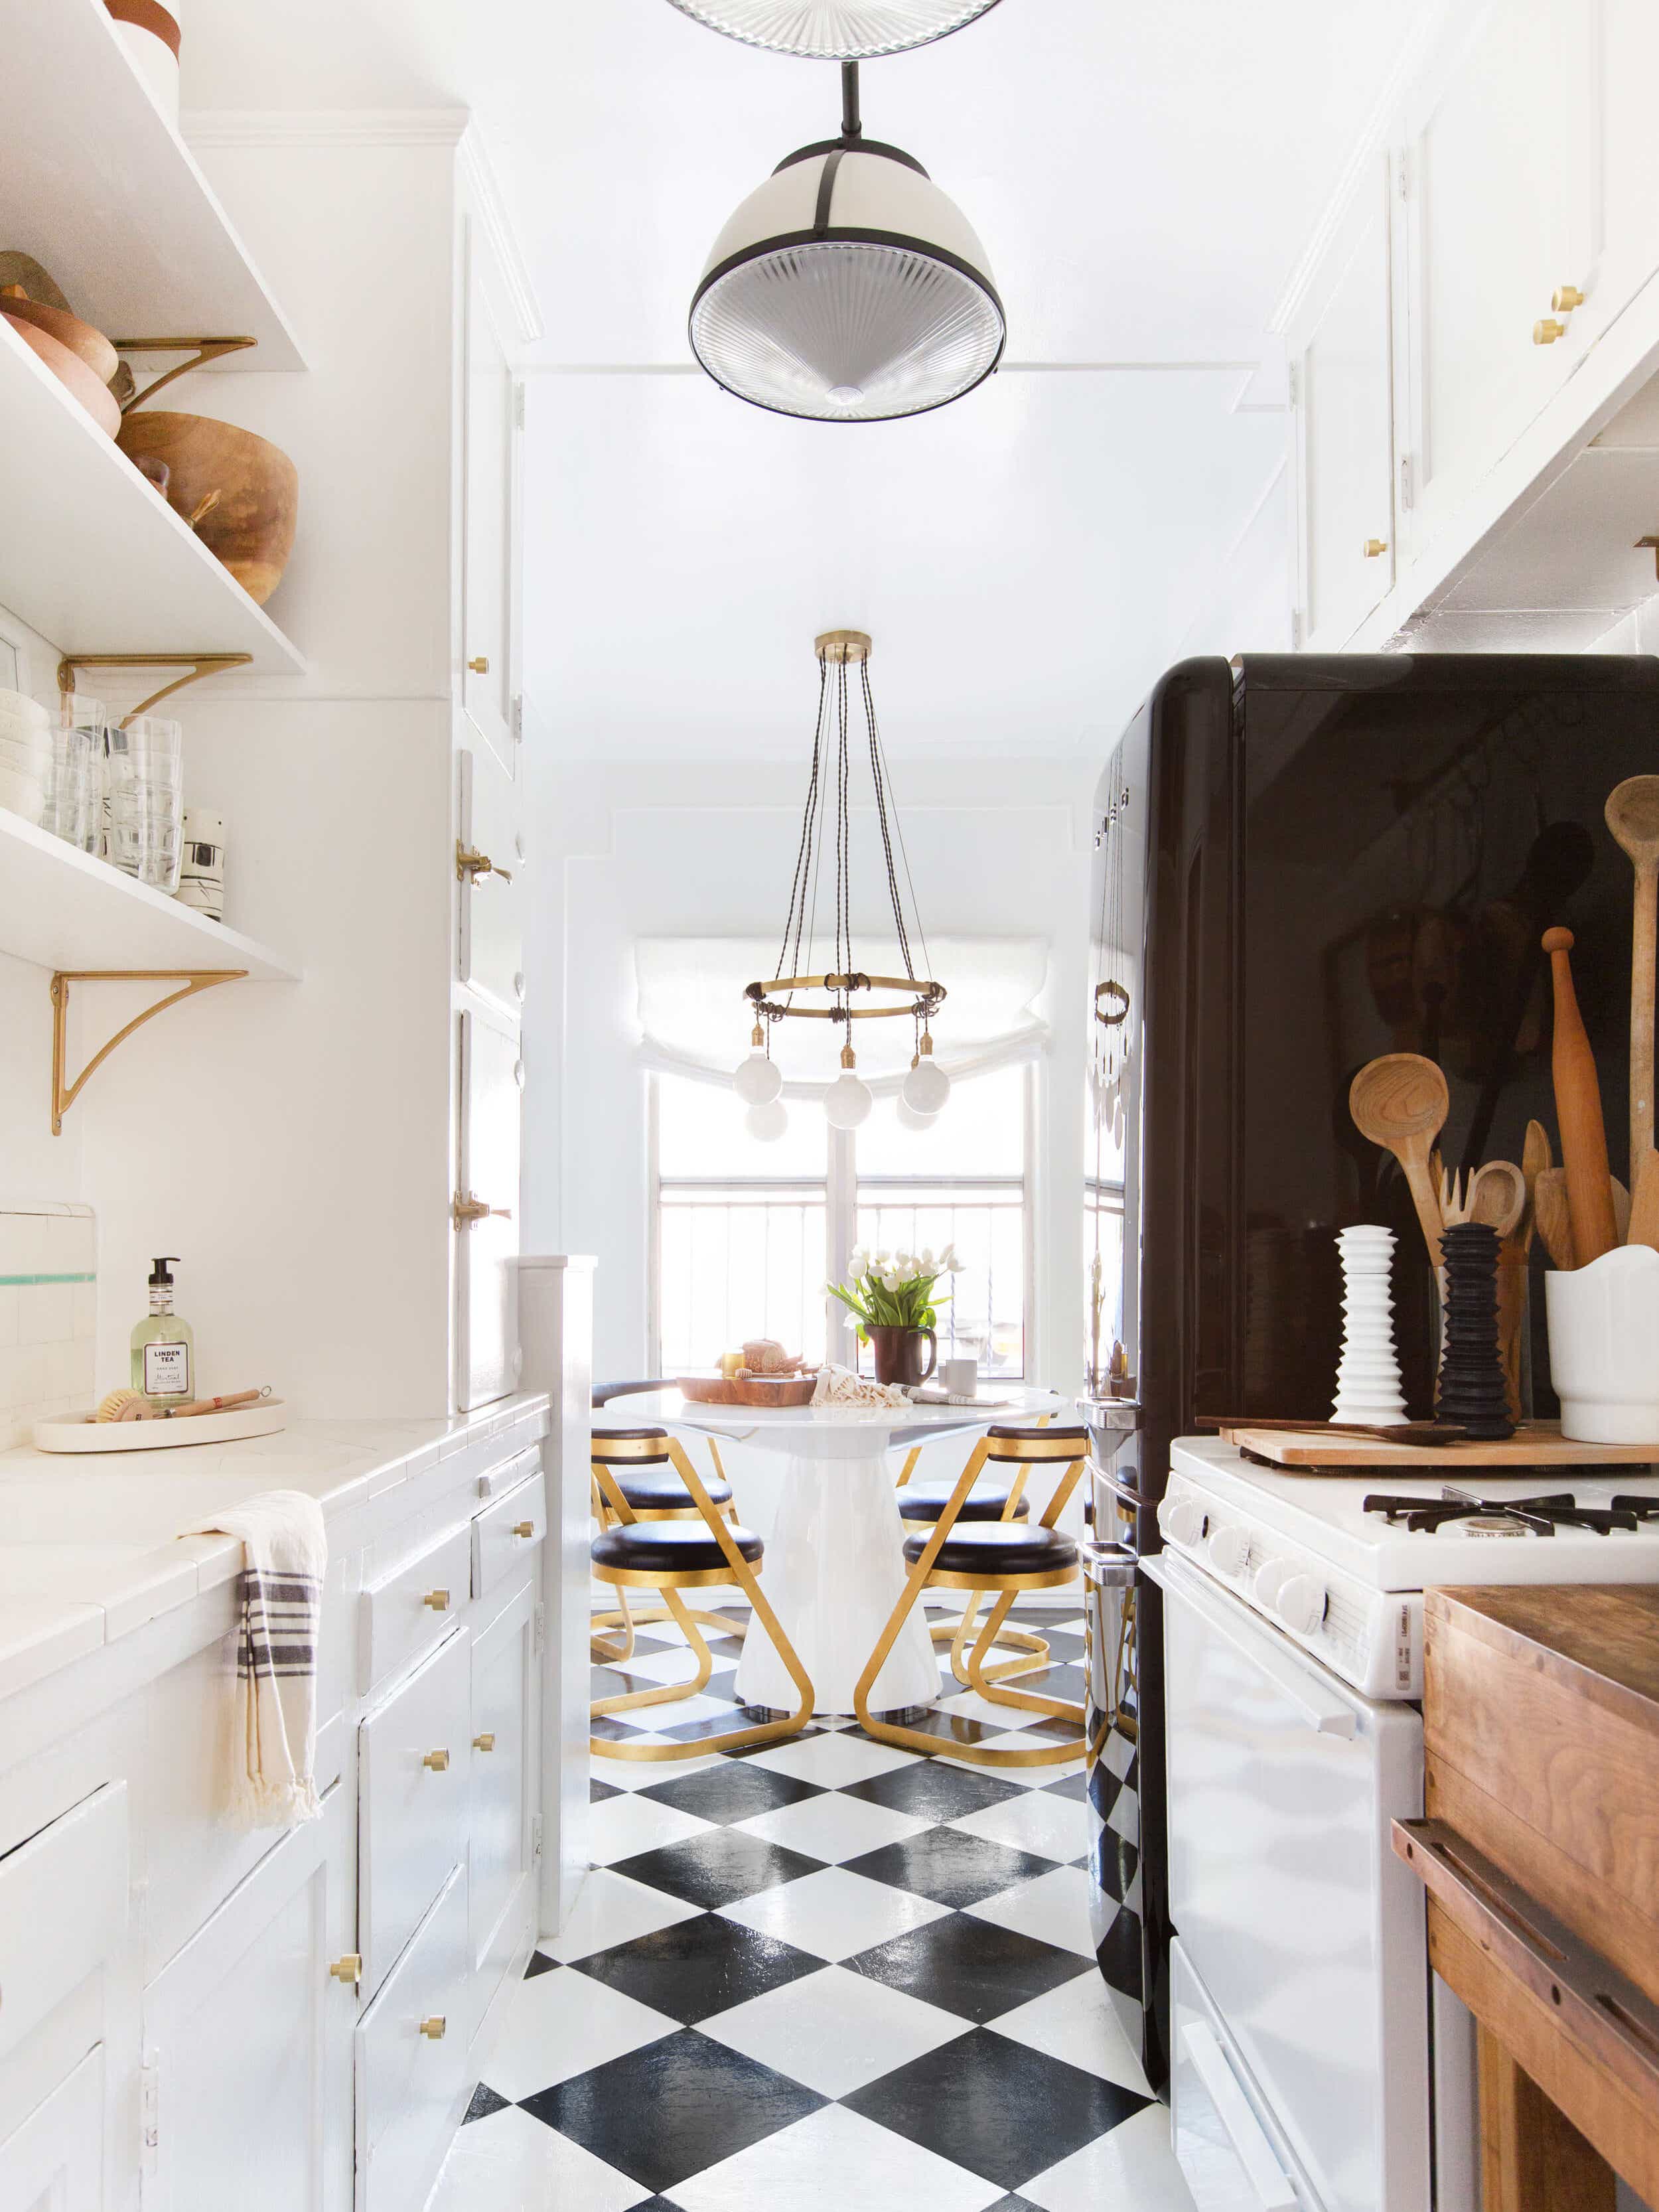 This “Dated” Kitchen Trend Is Back (and We’re Into It)